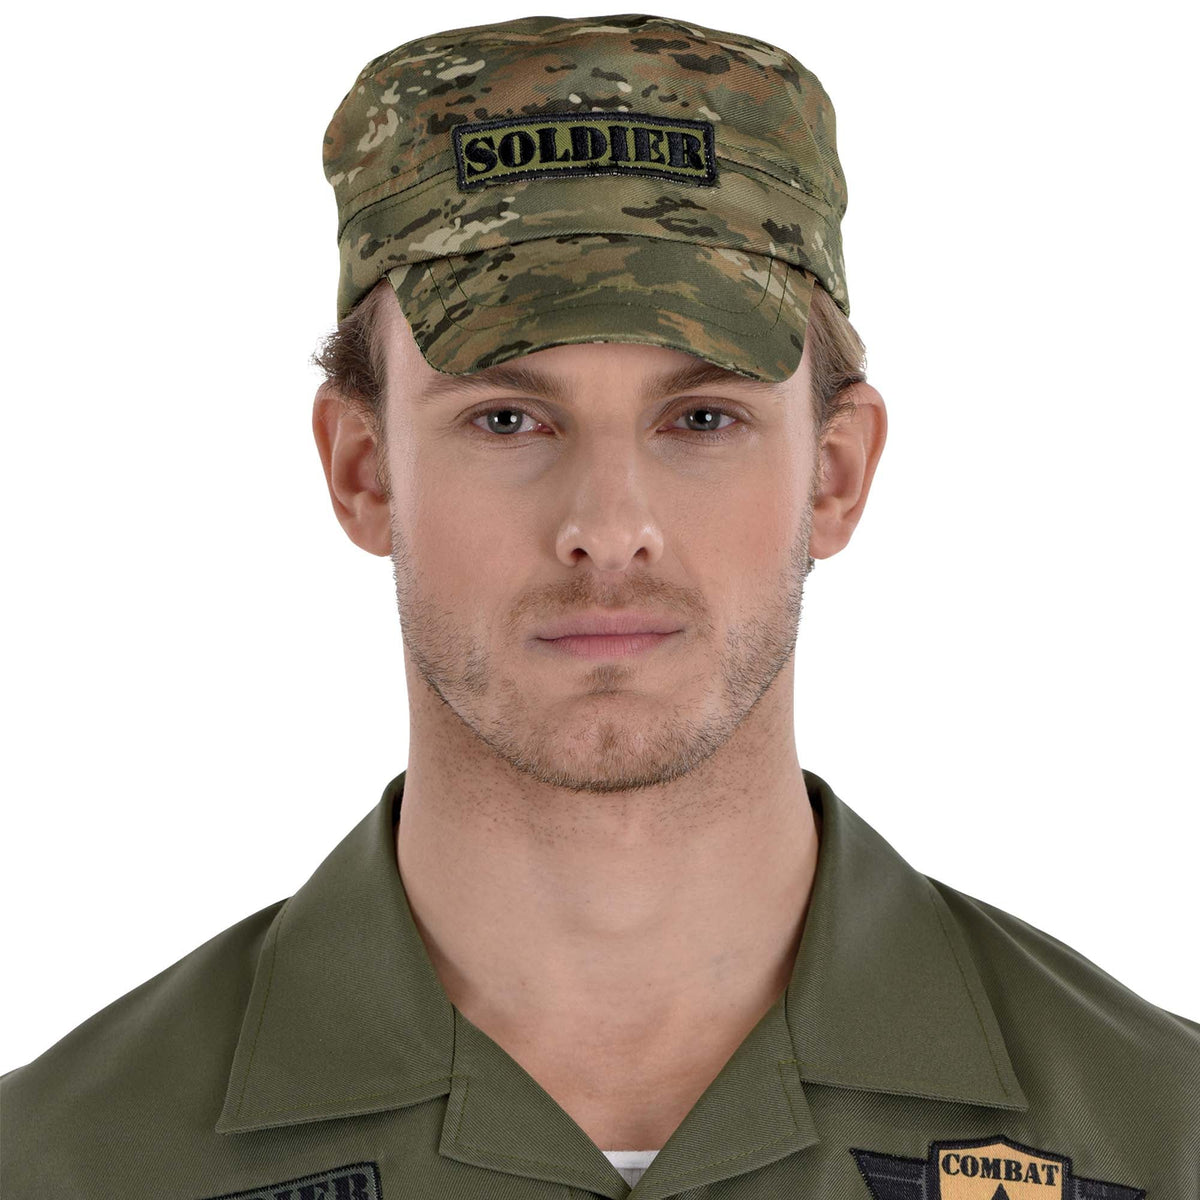 HALLOWEEN COSTUME CO. Costume Accessories Soldier Hat for Adults